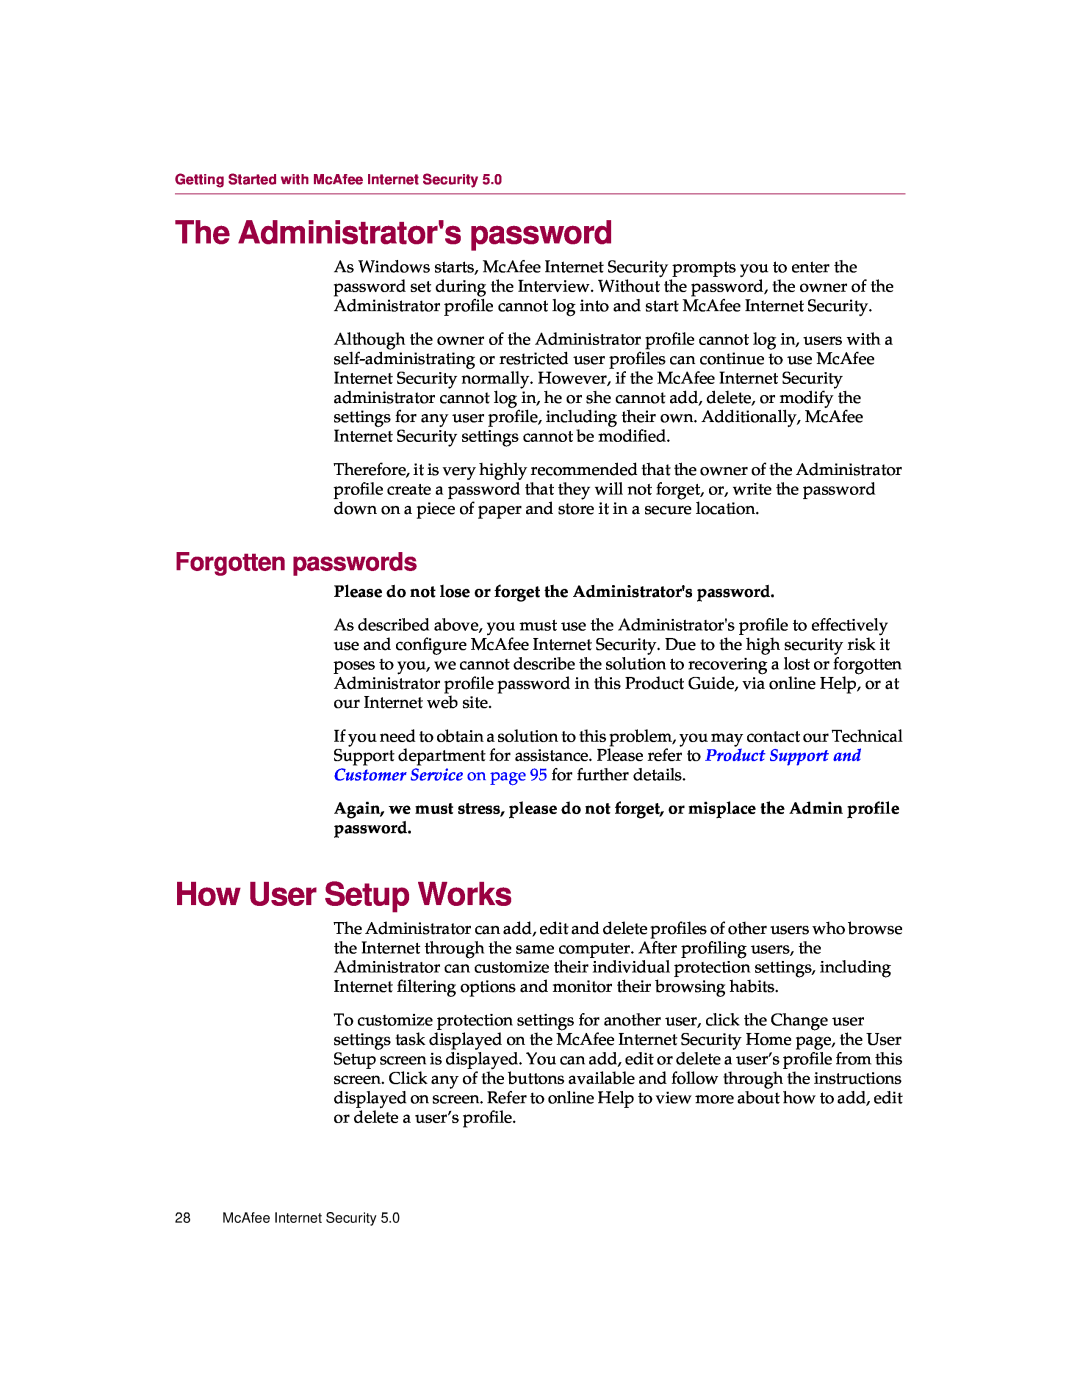 McAfee 5 manual The Administrators password, How User Setup Works, Forgotten passwords 